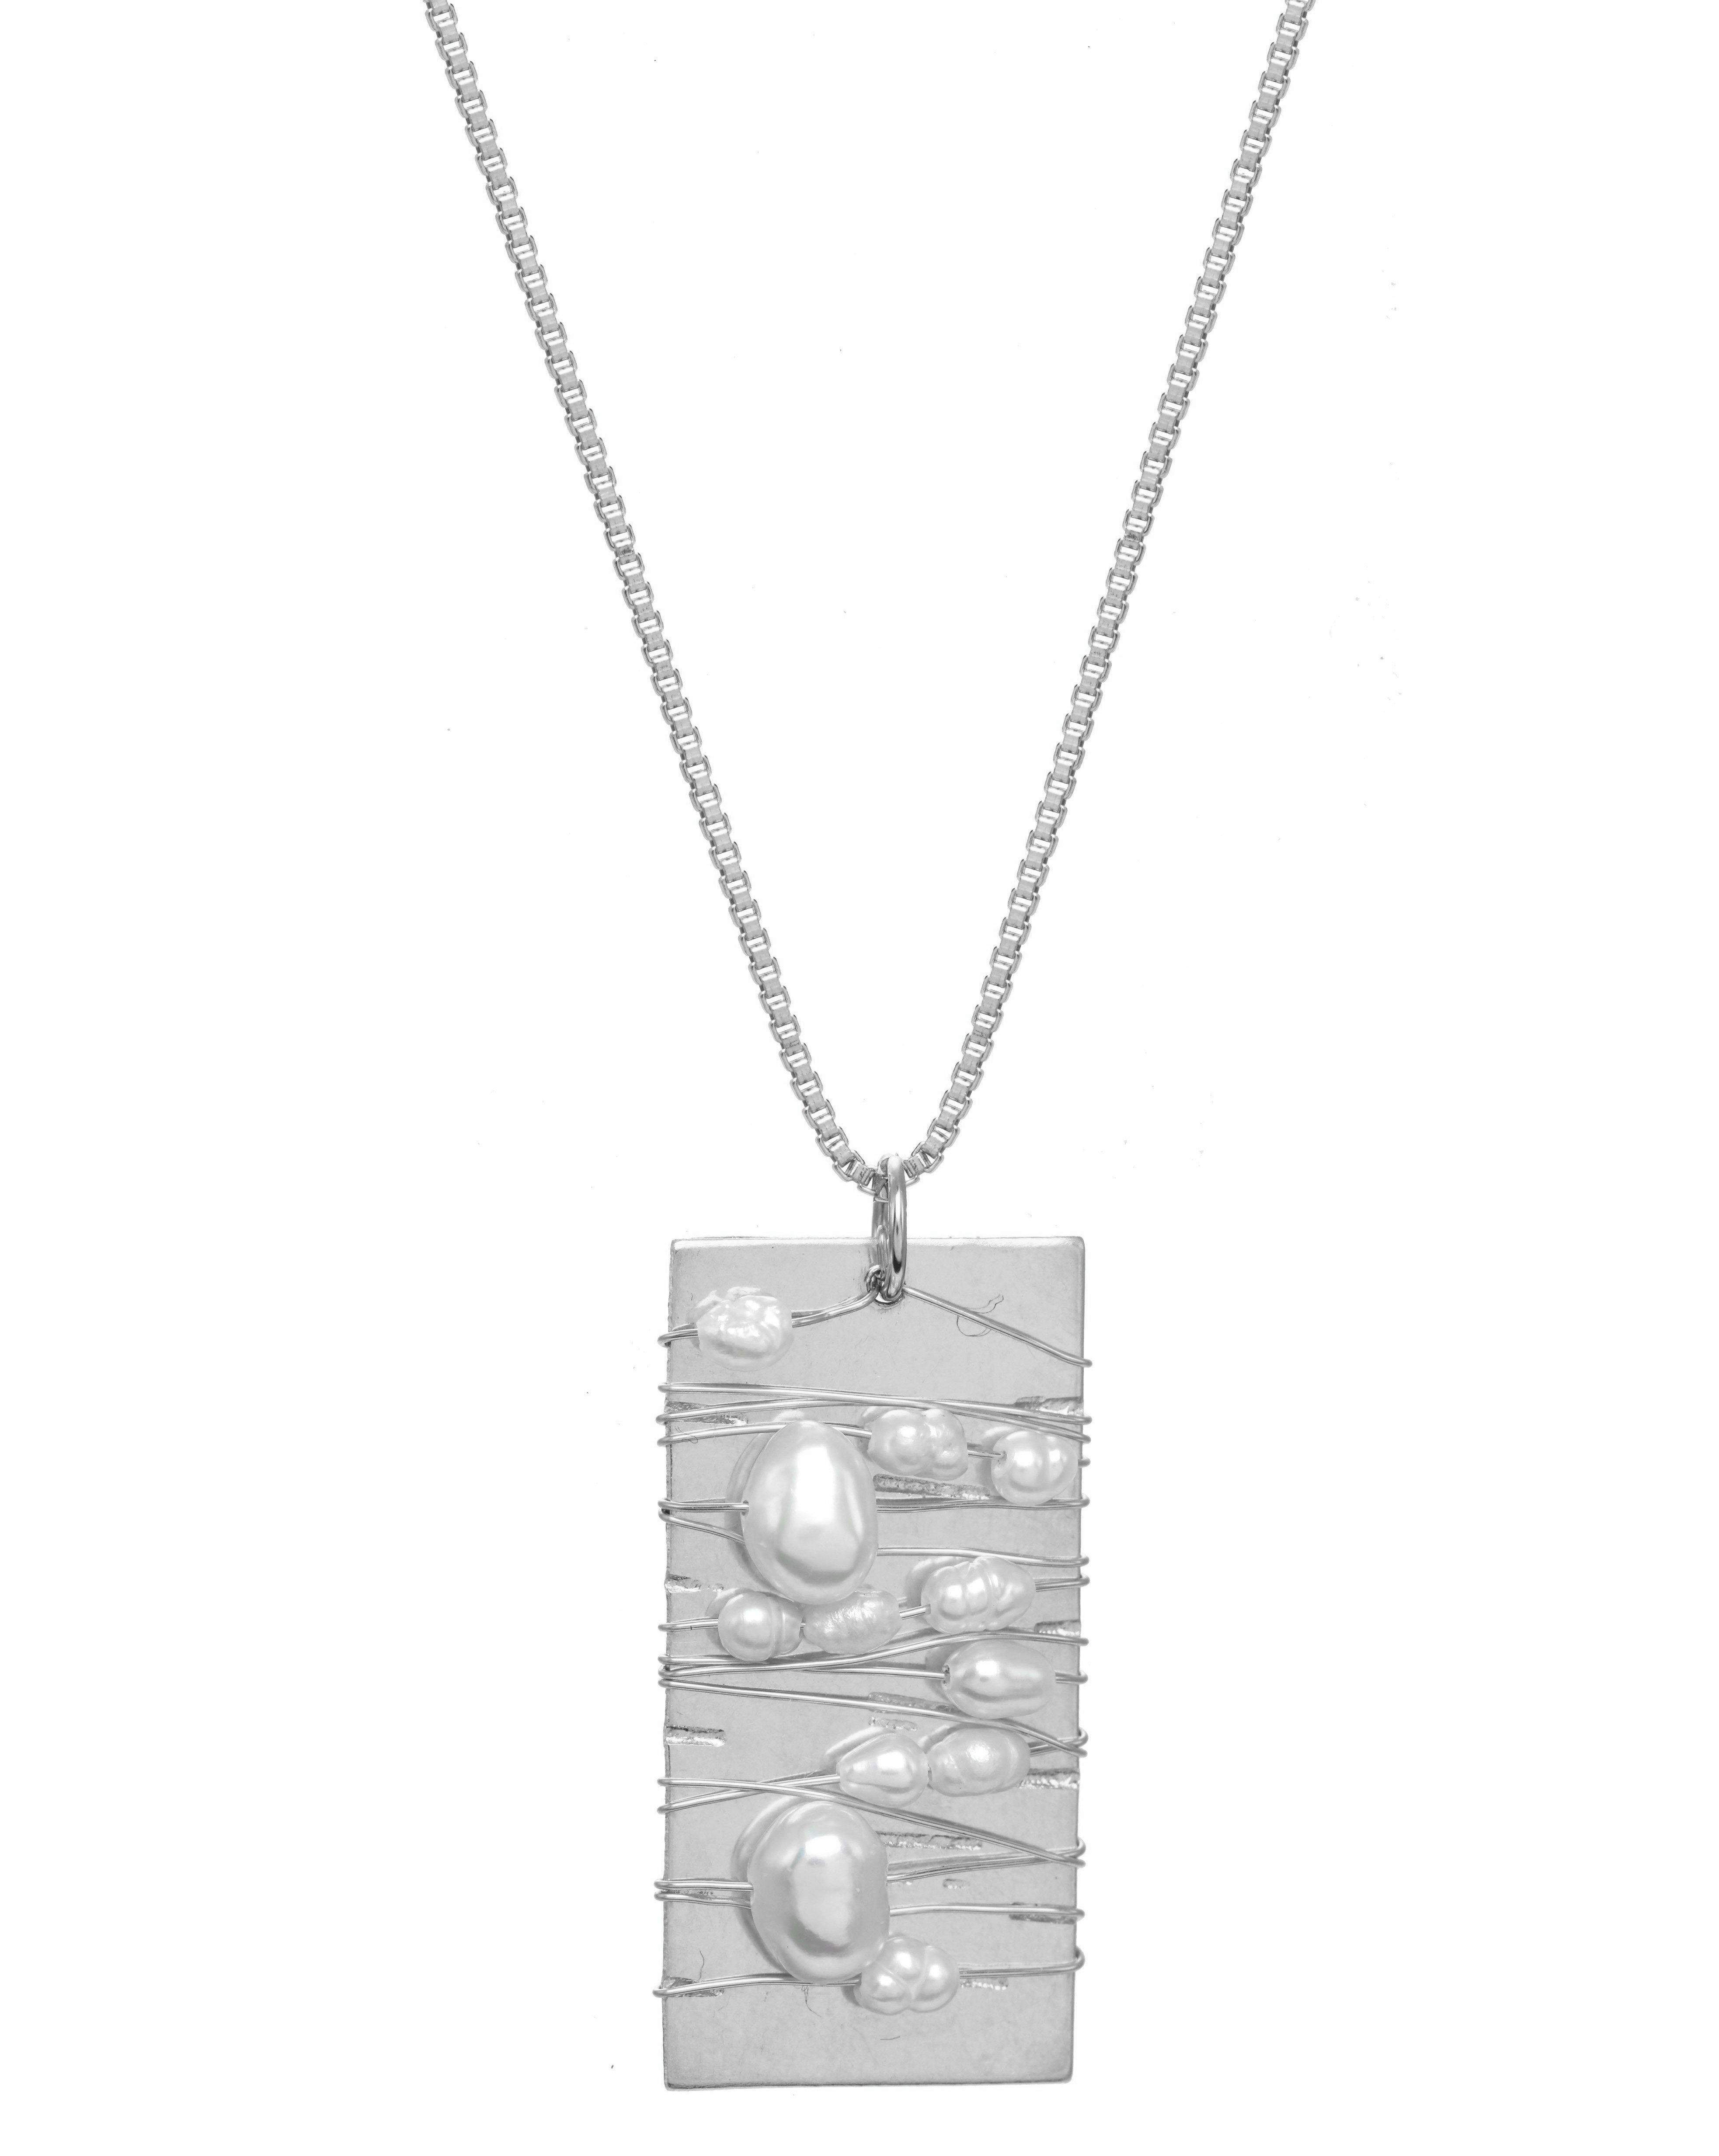 Tabla Necklace by KOZAKH. A 20 inches long necklace, crafted in Sterling Silver, featuring a 14x28mm flat rectangle medallion wrapped with white rice pearls and irregular white Pearls.